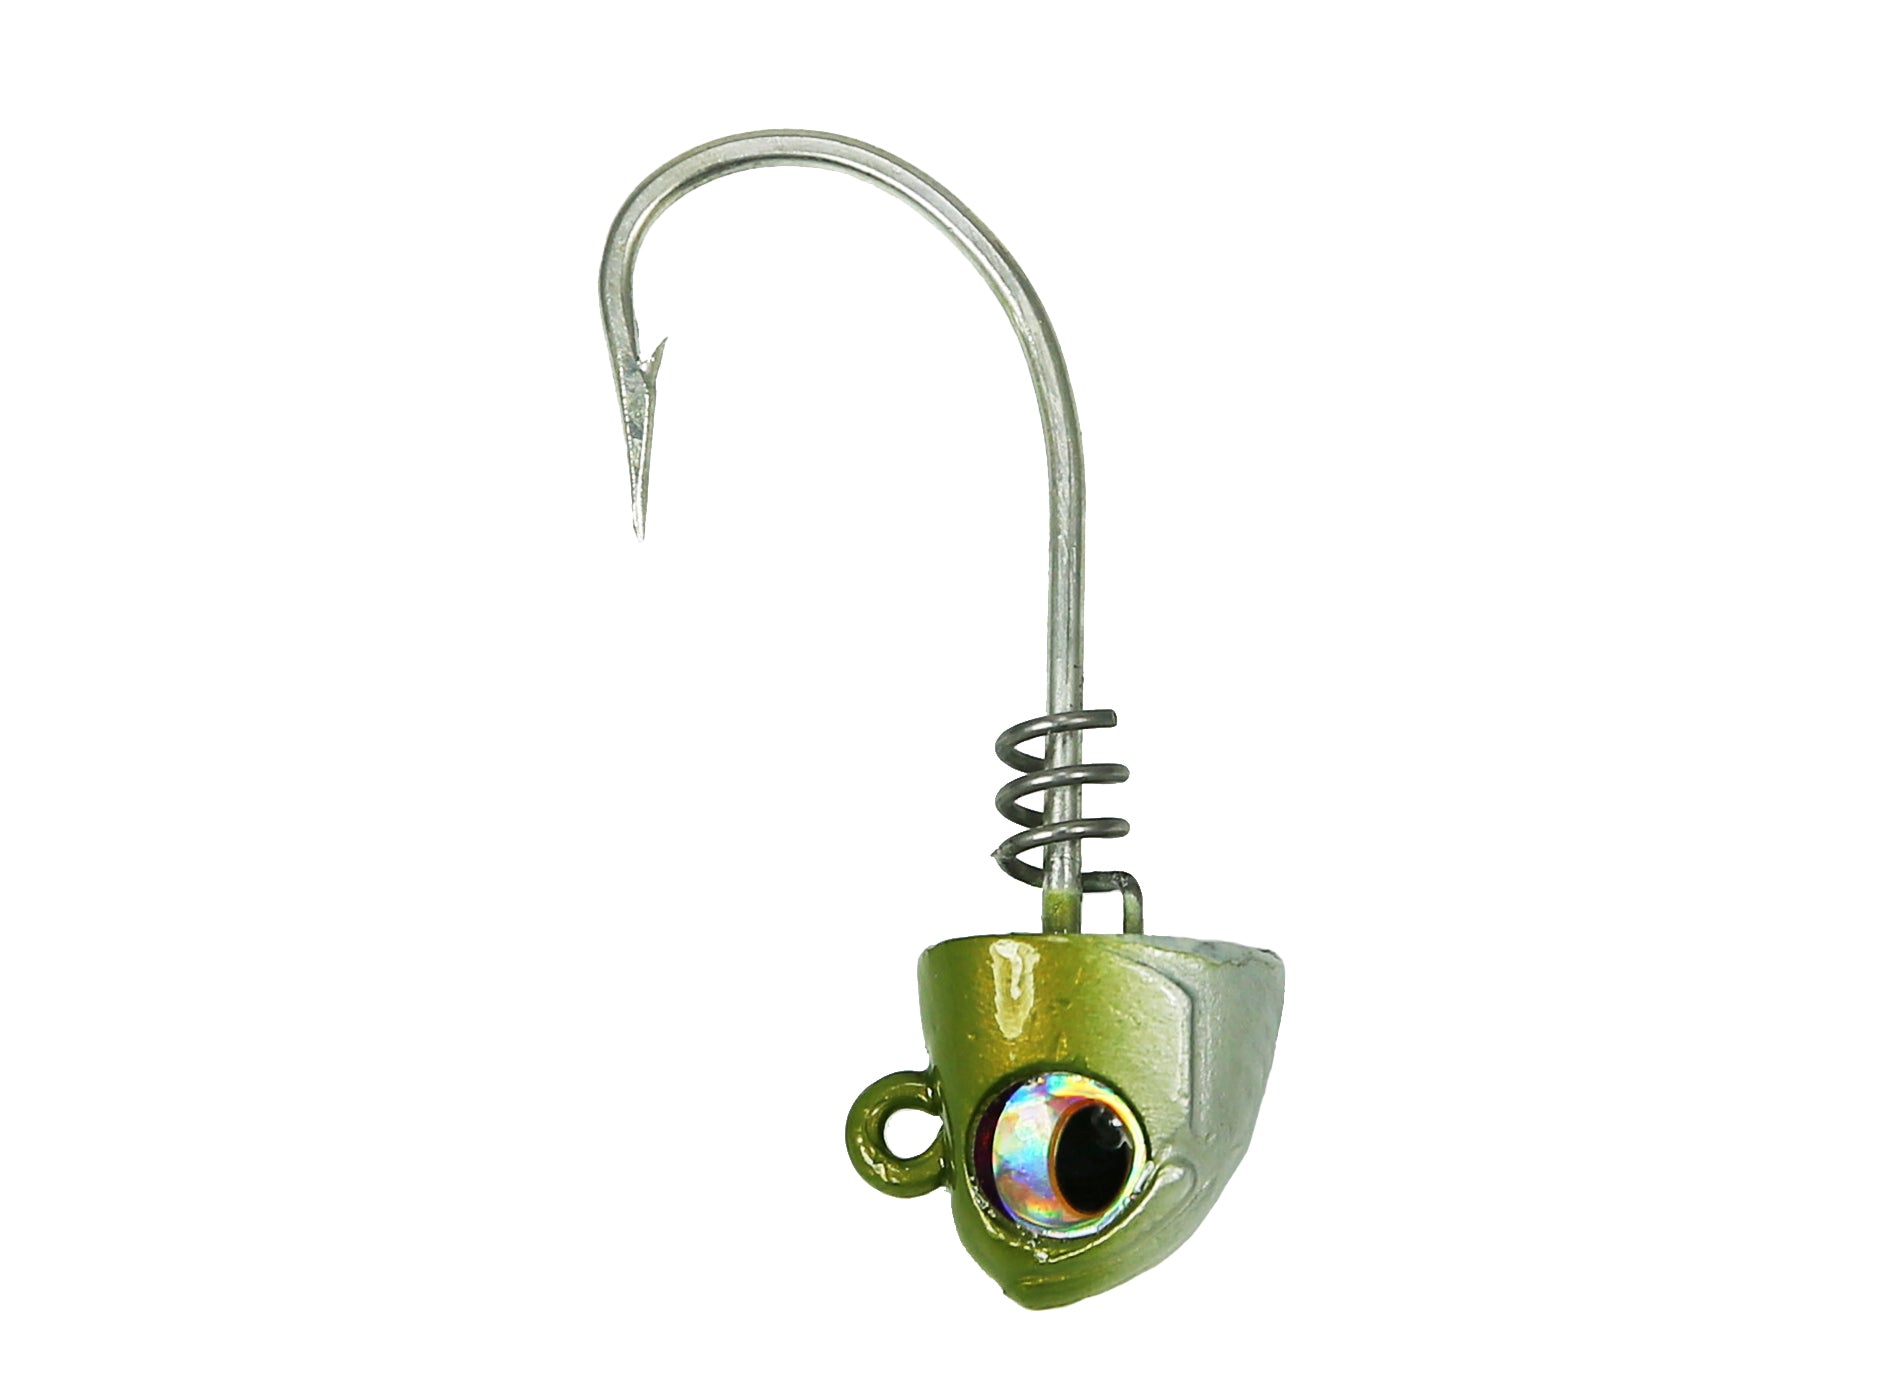 No Live Bait Needed Screw Lock Jig Heads for 5 Paddle Tails